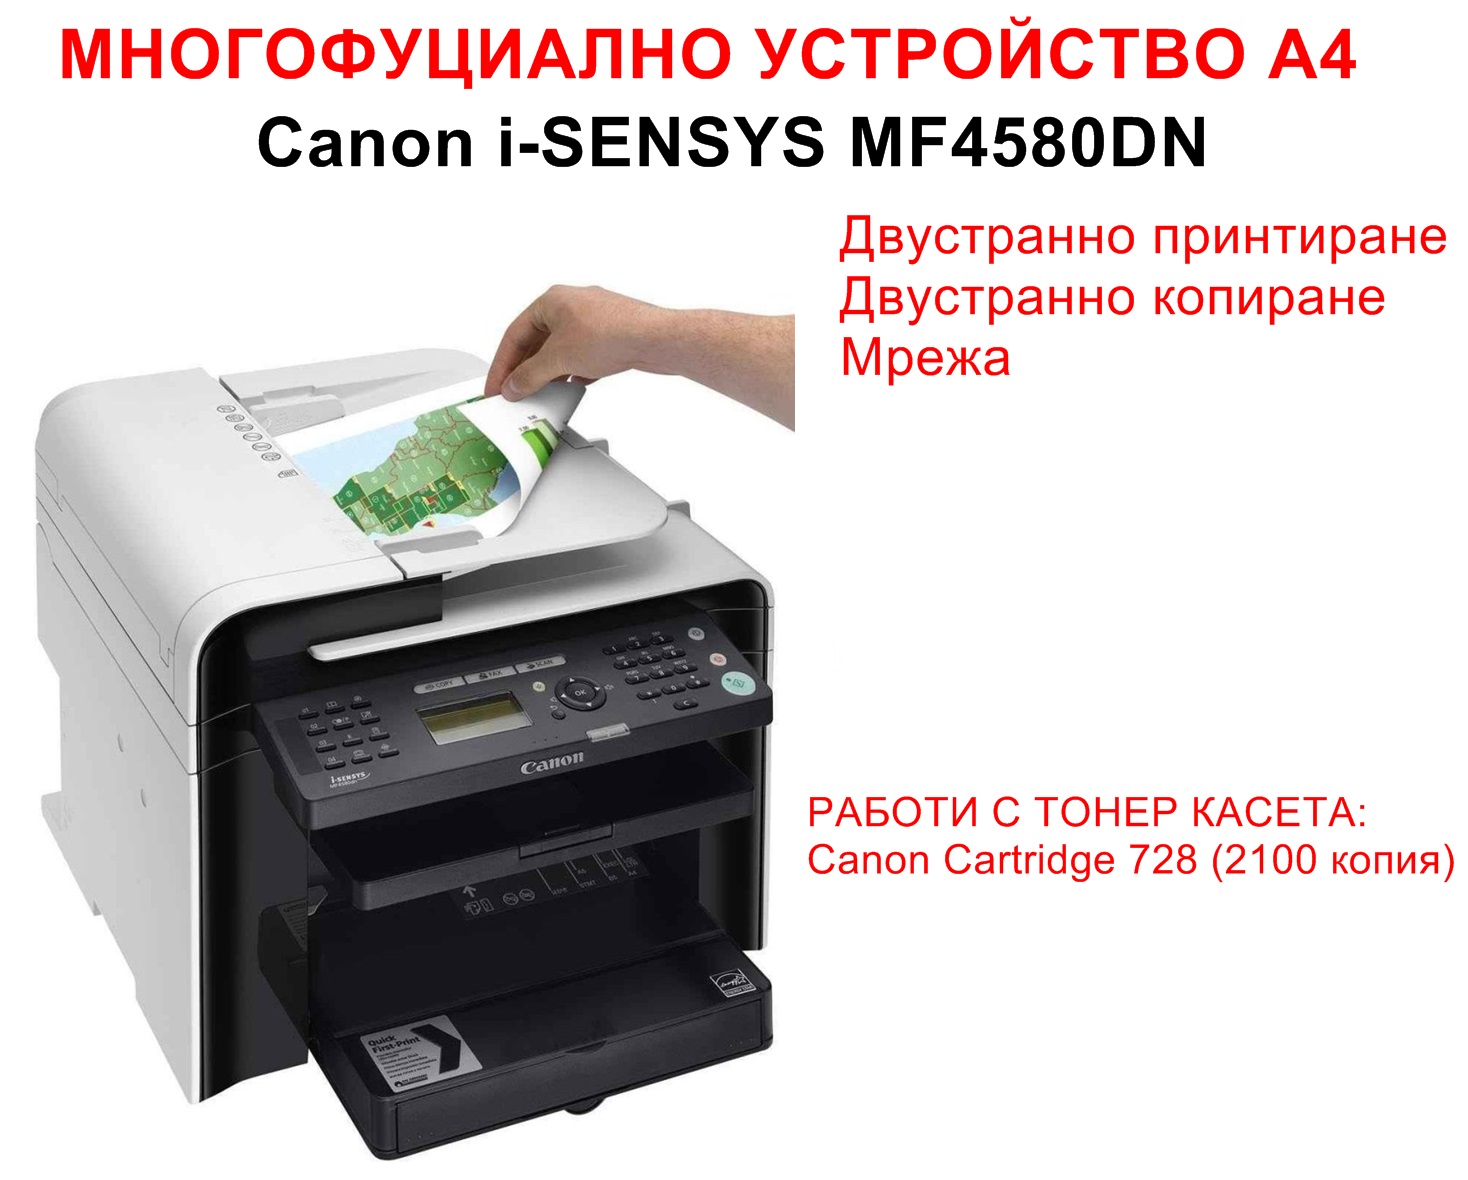 All-in-One Printer Canon i-SENSYS MF4580DN